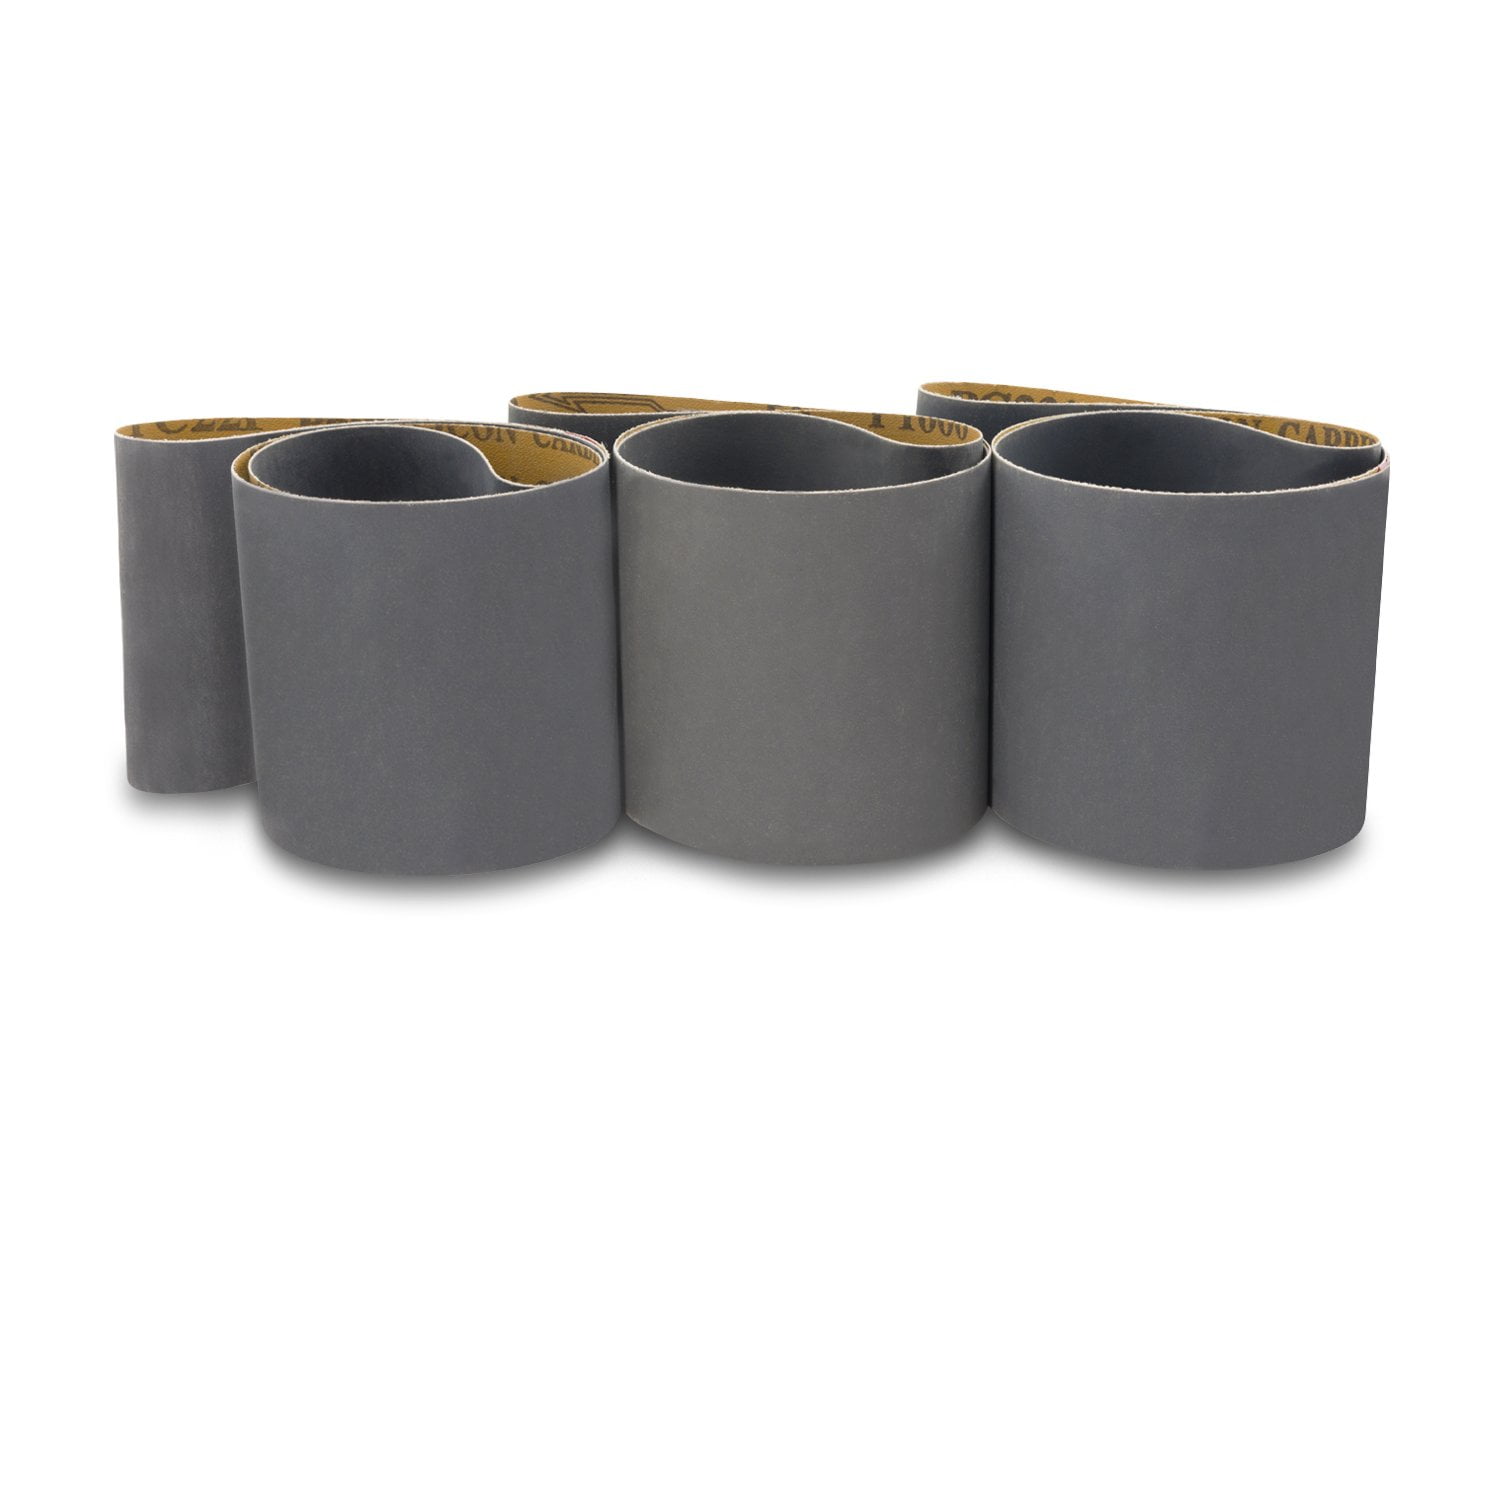 3 X 18 Inch 220 Grit Silicon Carbide Sanding Belts 8 Pack